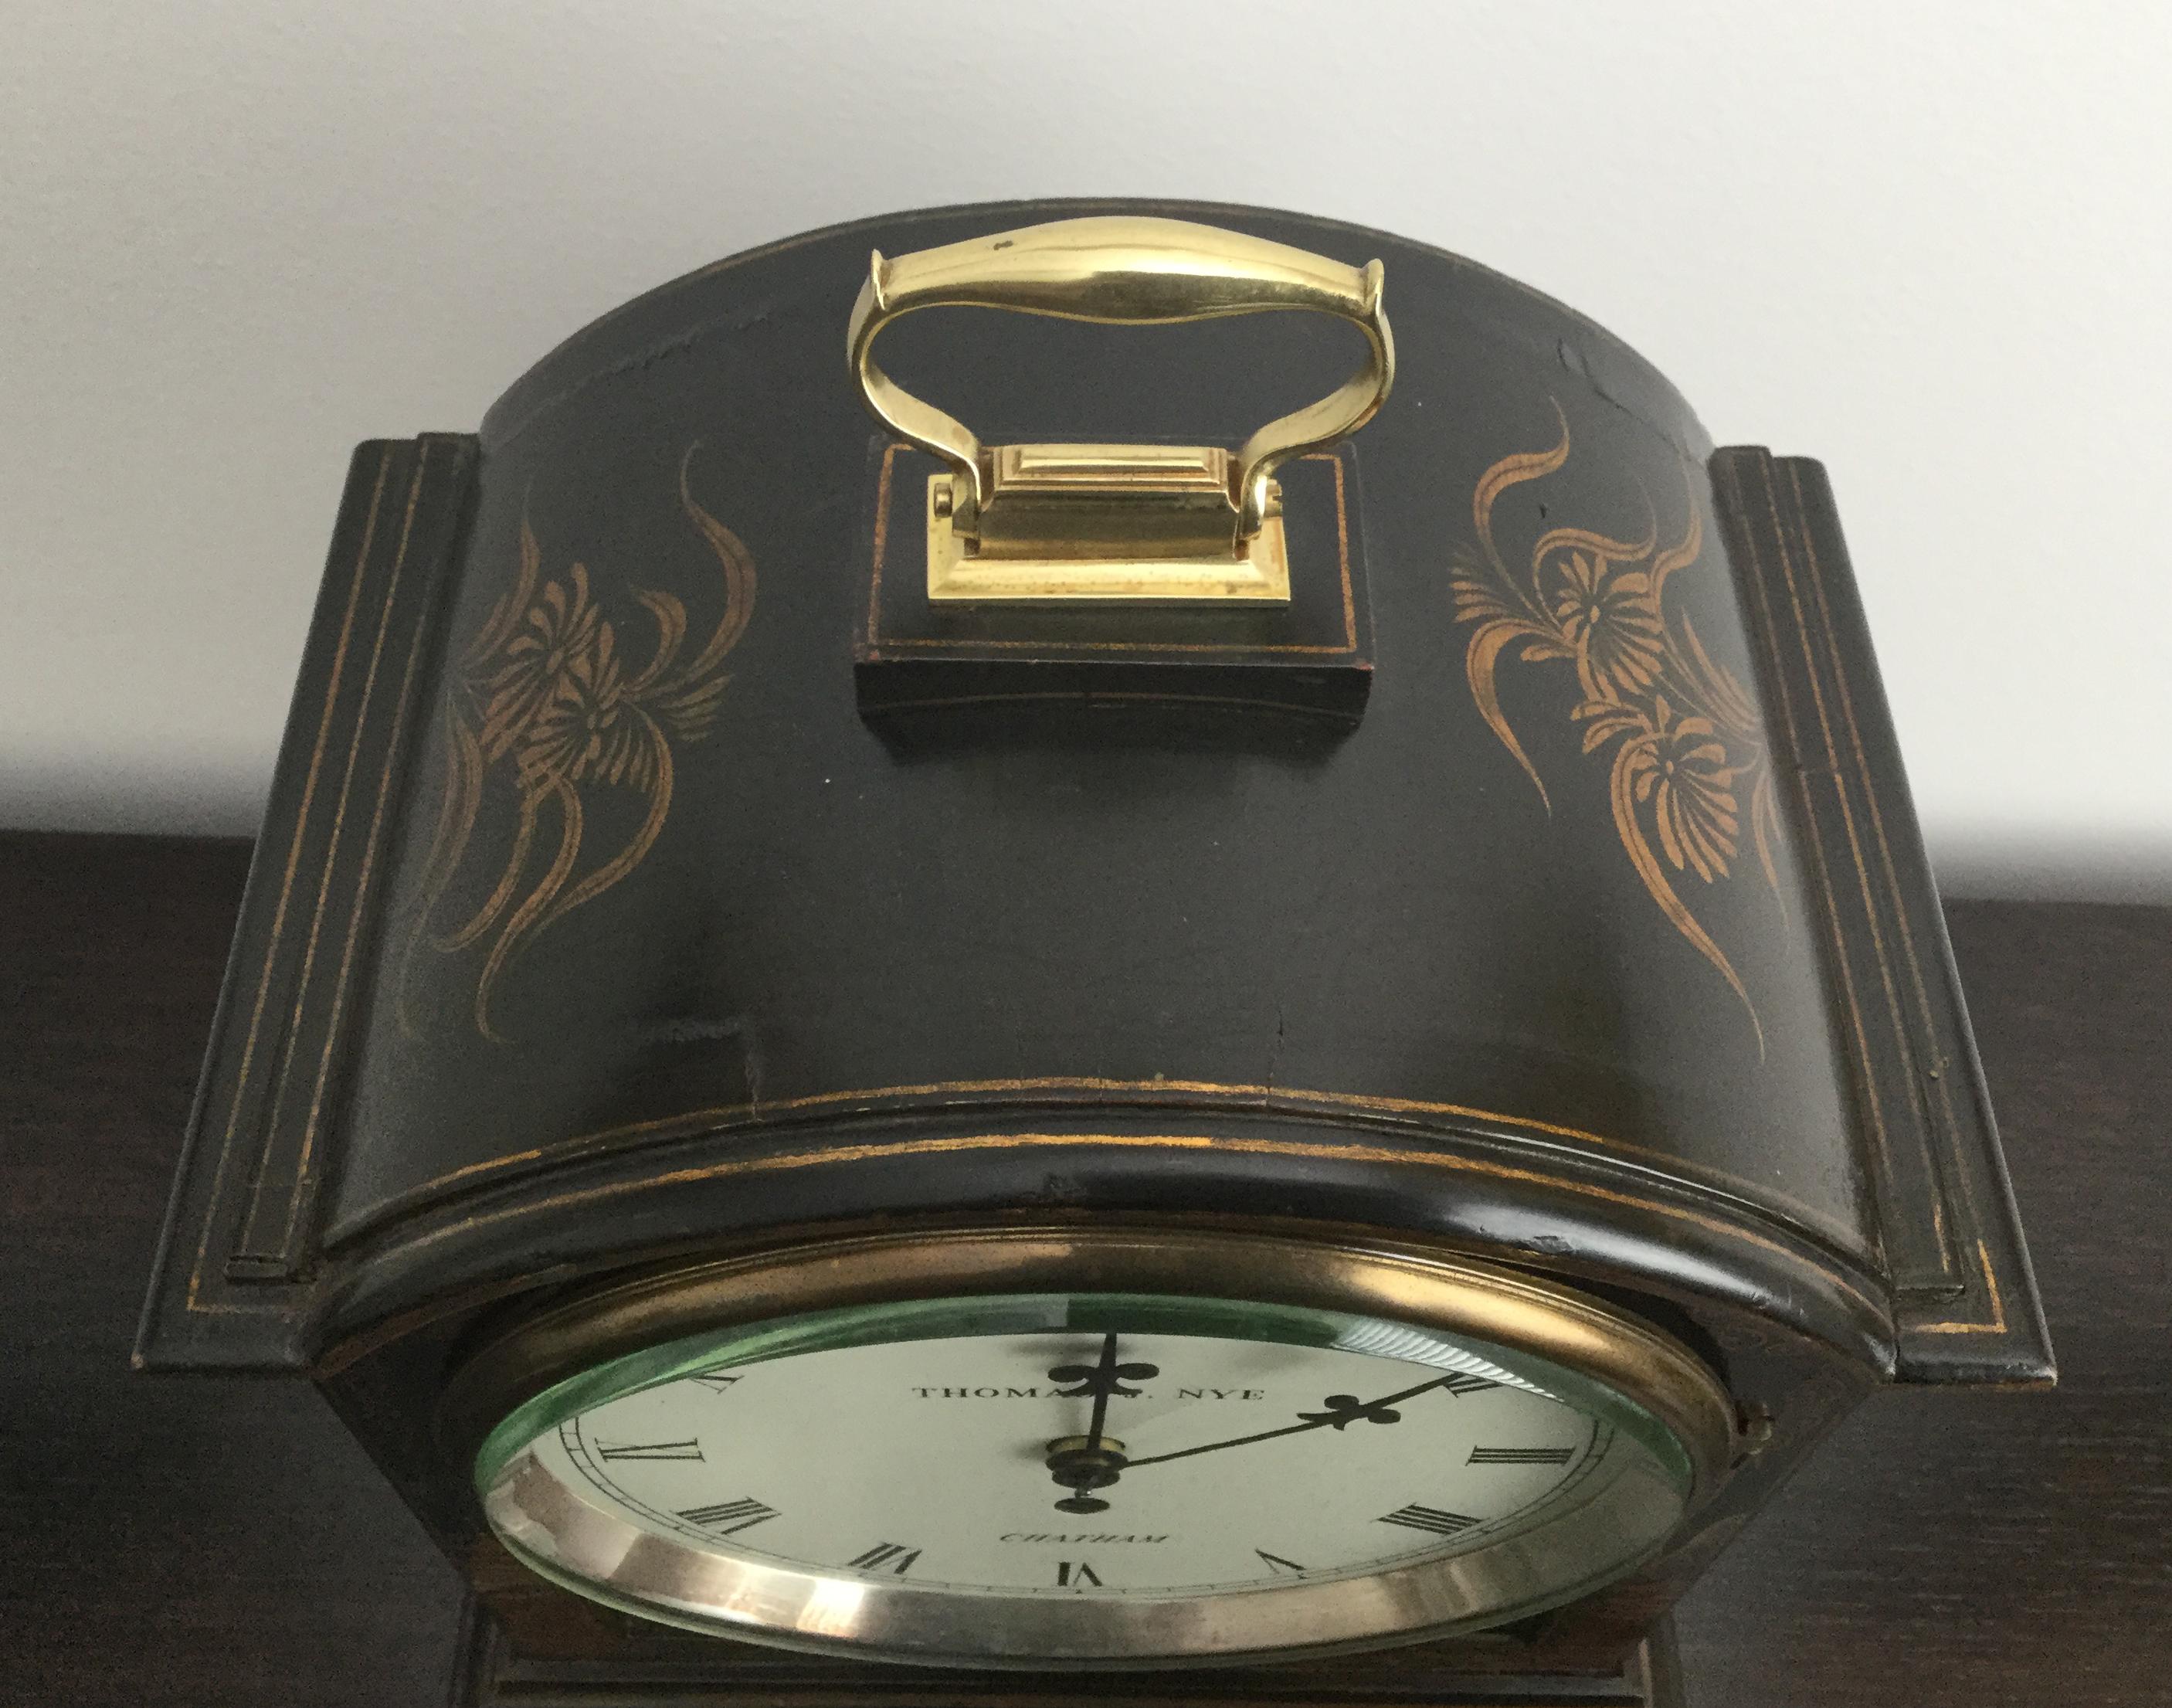 An attractive black chinoiserie decorated bracket or mantel clock, the wooden case profusely decorated in relief with garden scenes, figures, pagodas and floral motifs, the top with brass handle, on brass ogee feet.

The white painted dial with